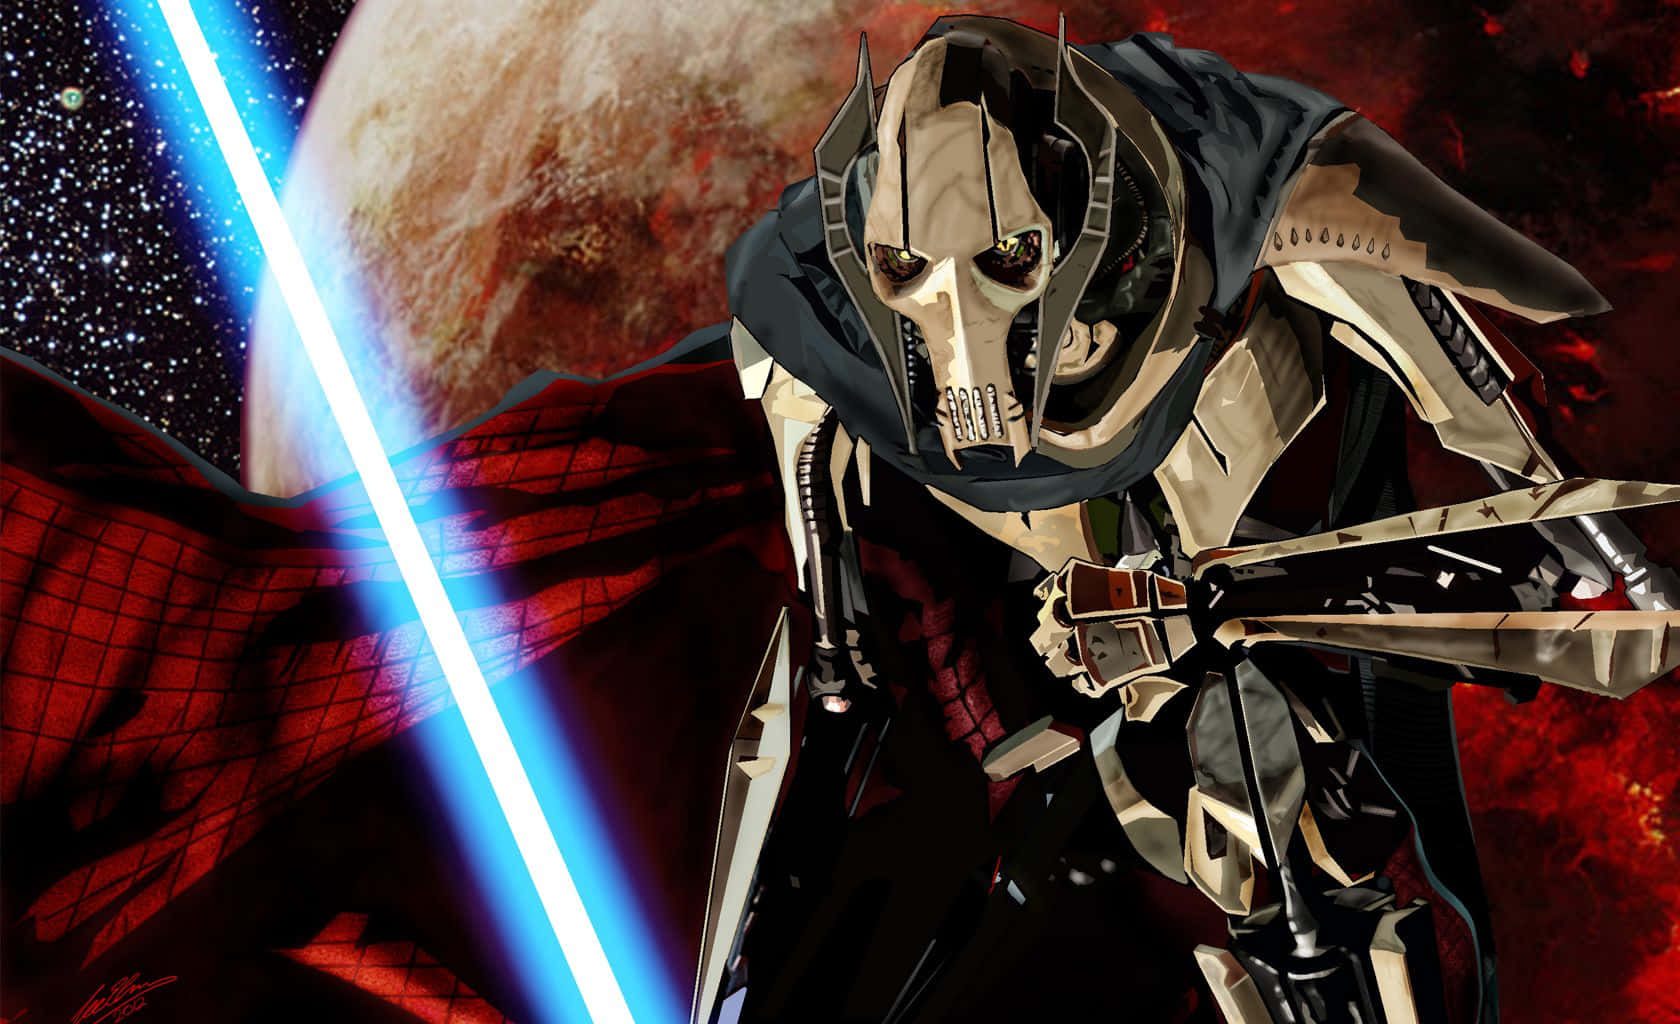 General Grievous With Light Saber Background